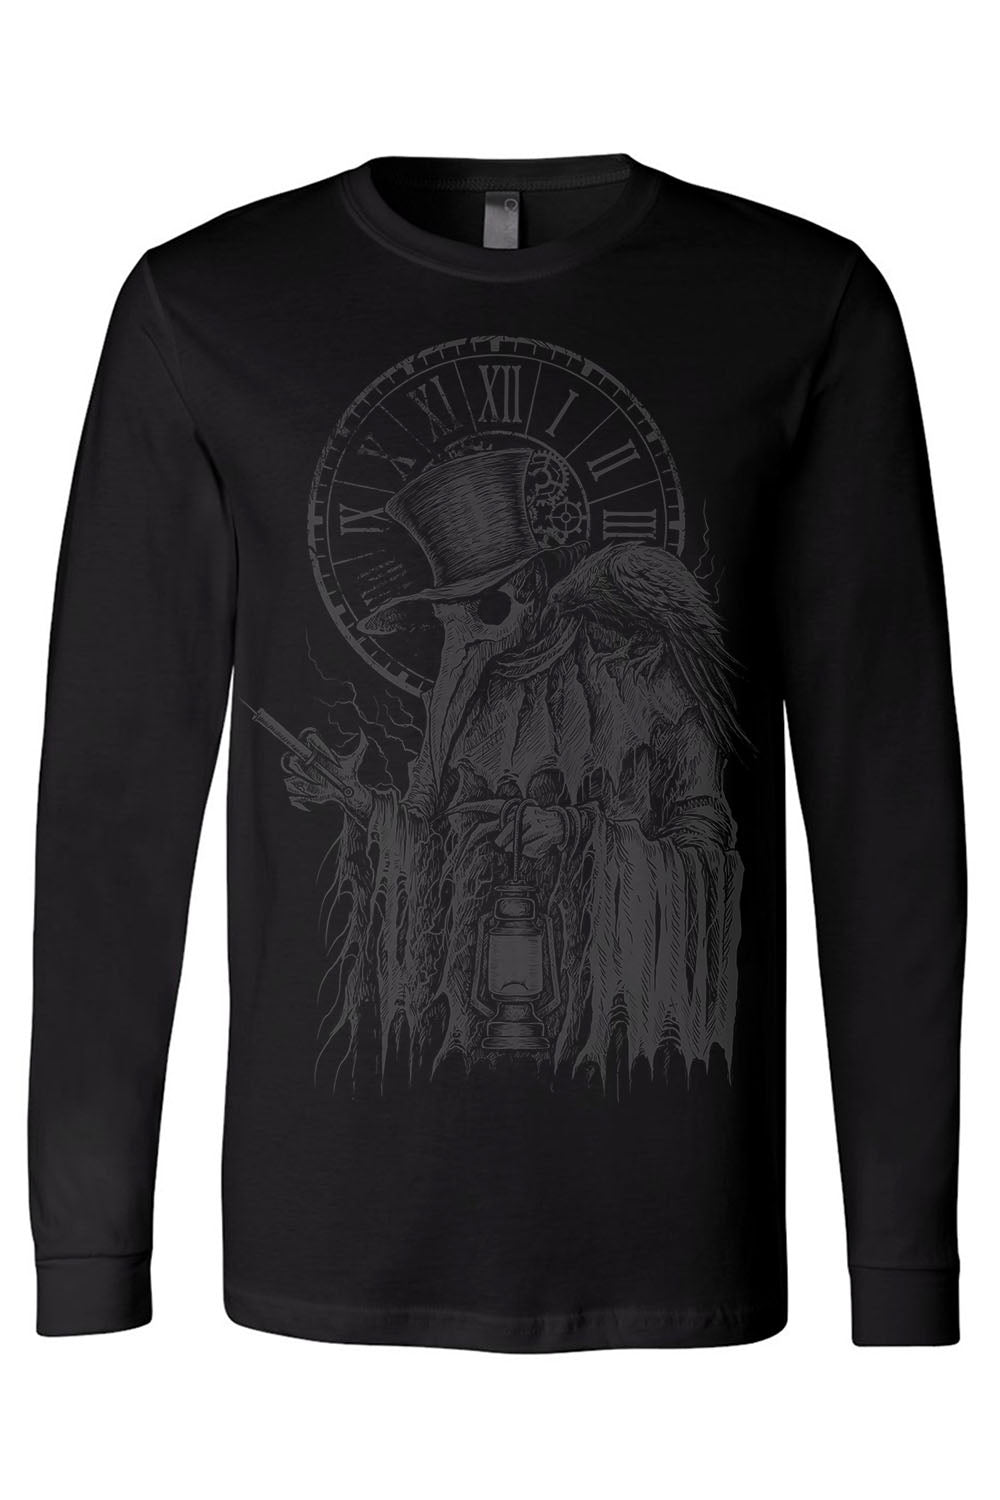 Plague Doctor Tee [GREY ASHES] [Multiple Styles Available]